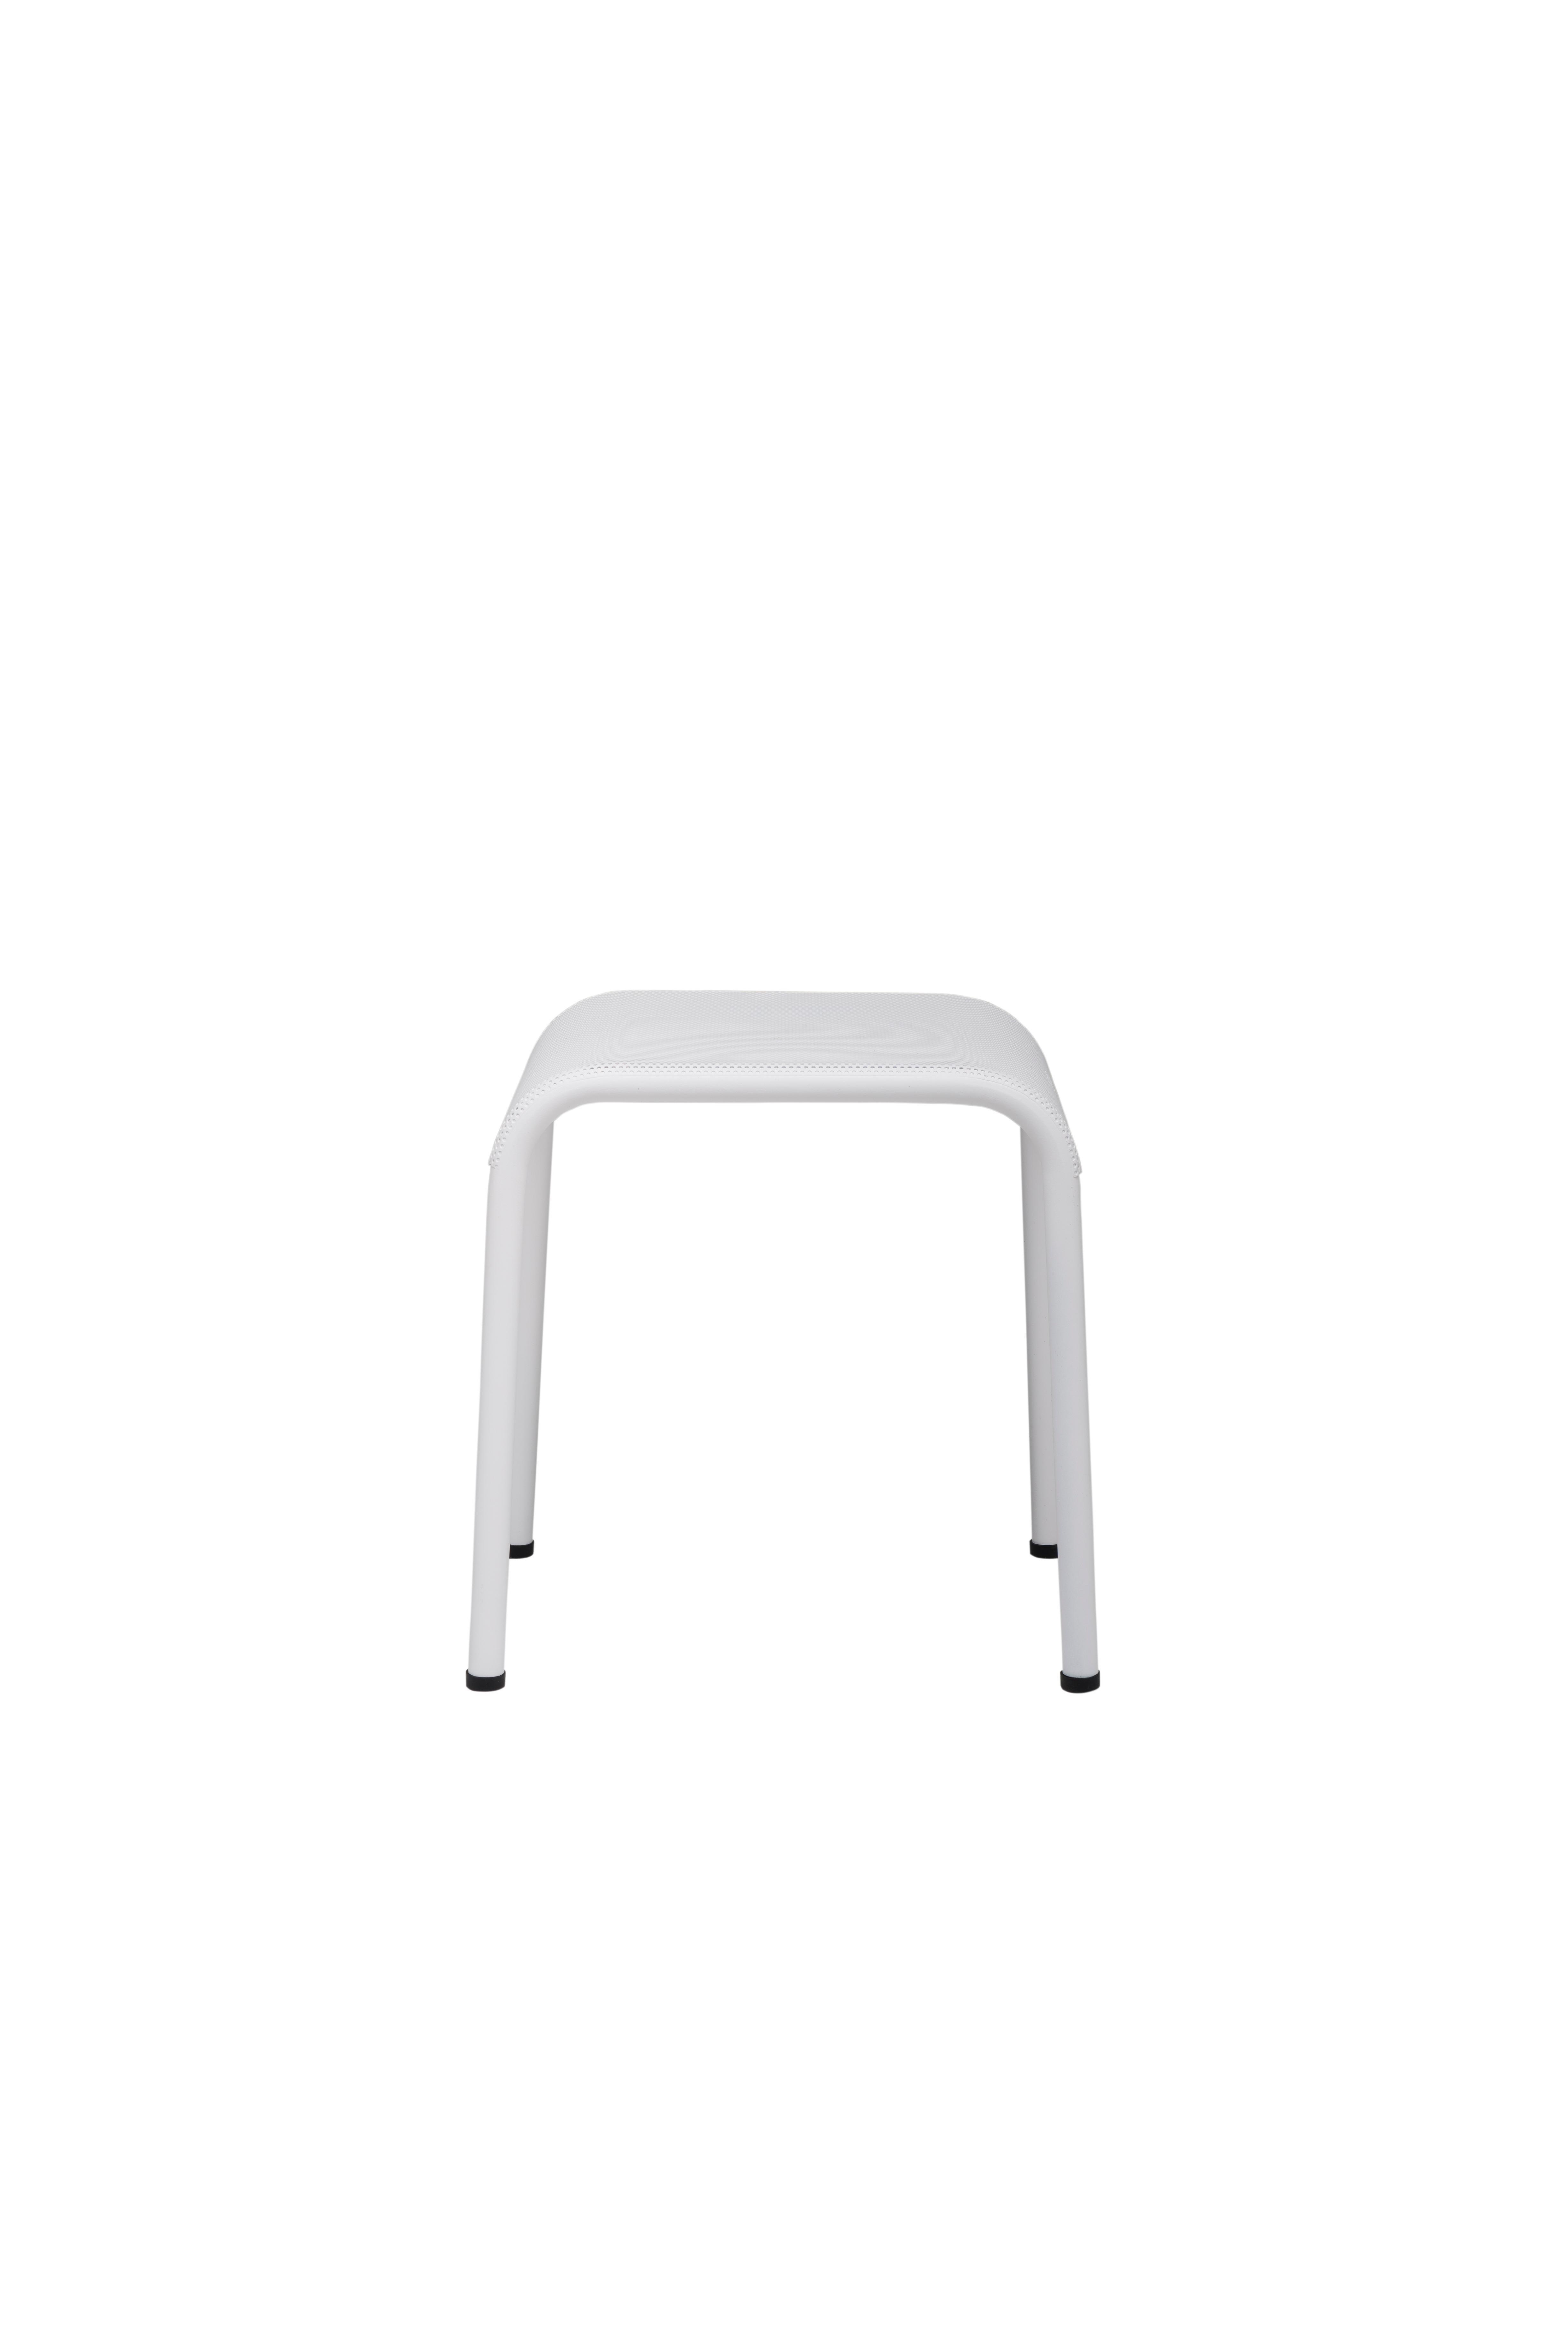 French Tolix T37 Stool Perforated Outdoor Painted in White For Sale